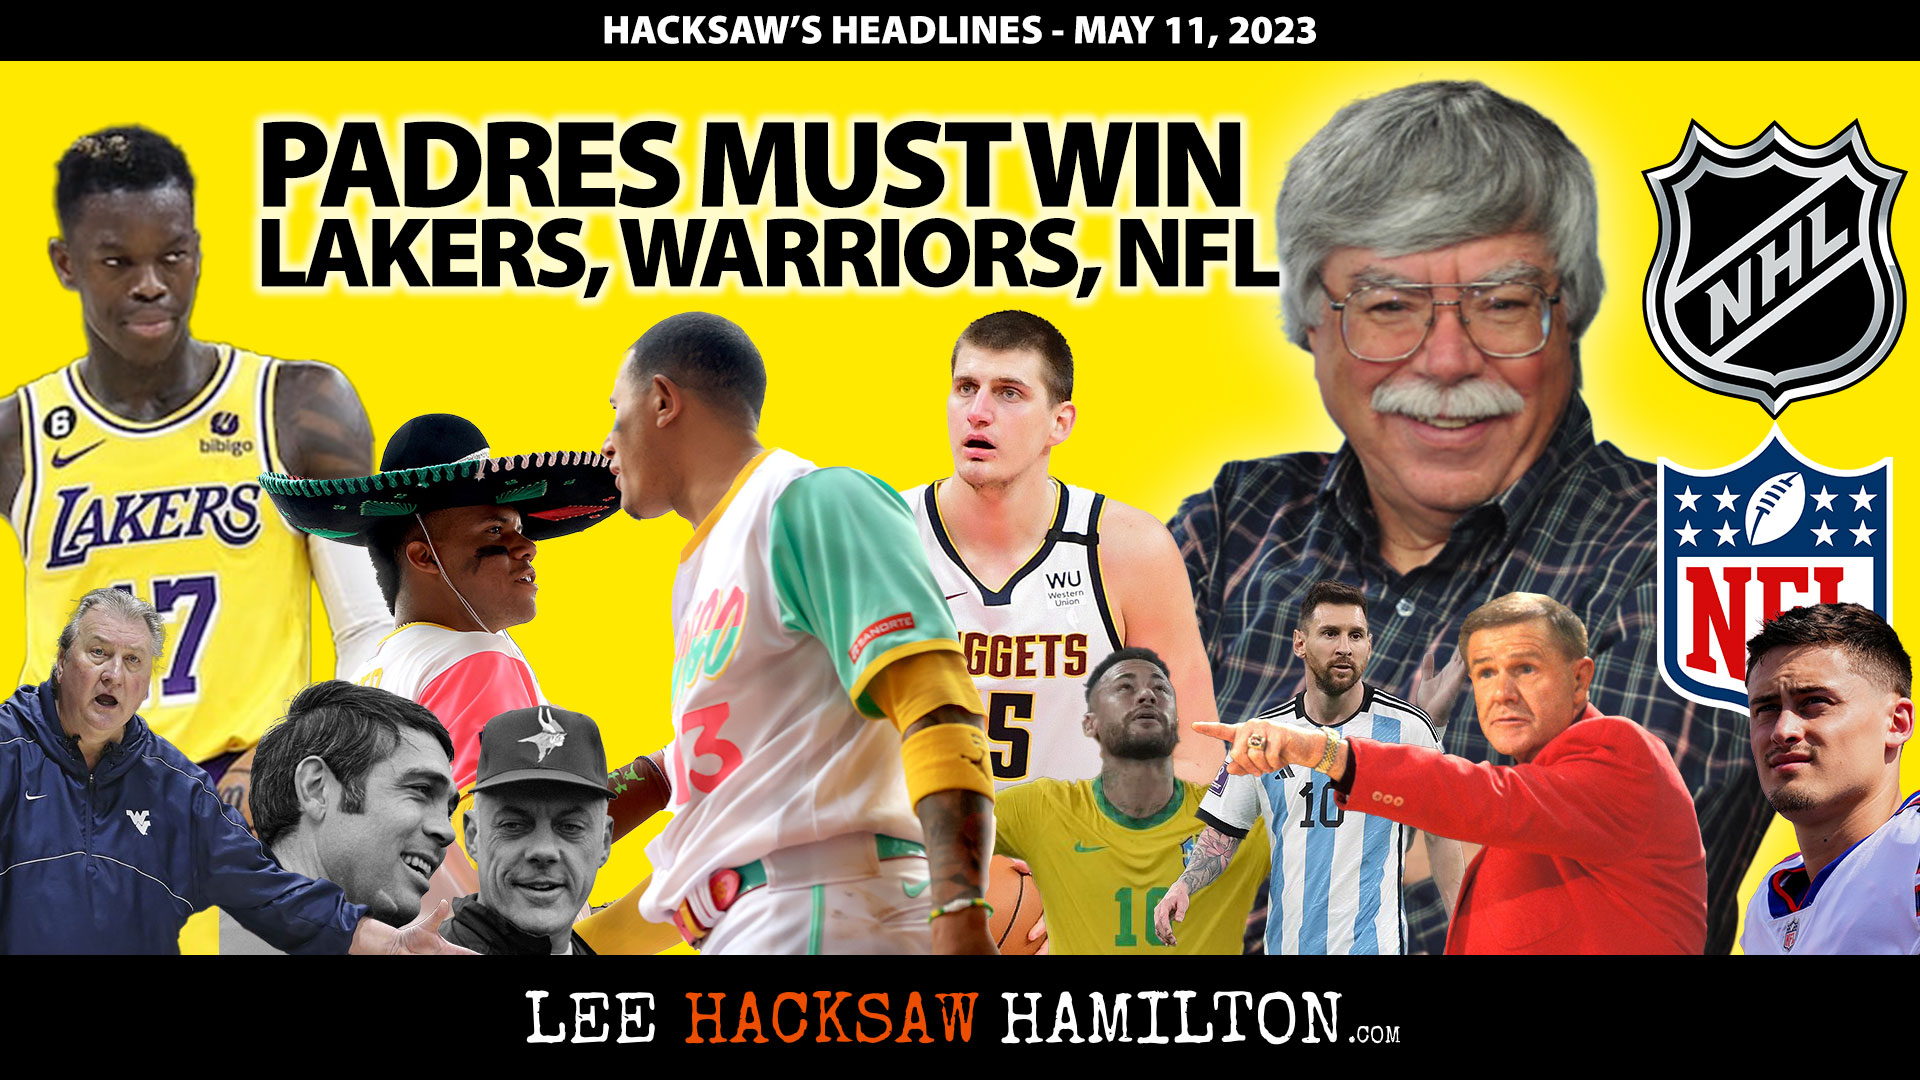 Lee Hacksaw Hamilton discusses Padres Need to Win, Lakers, Warriors, Suns, Nuggets, NFL, Hockey, Soccer, NASCAR